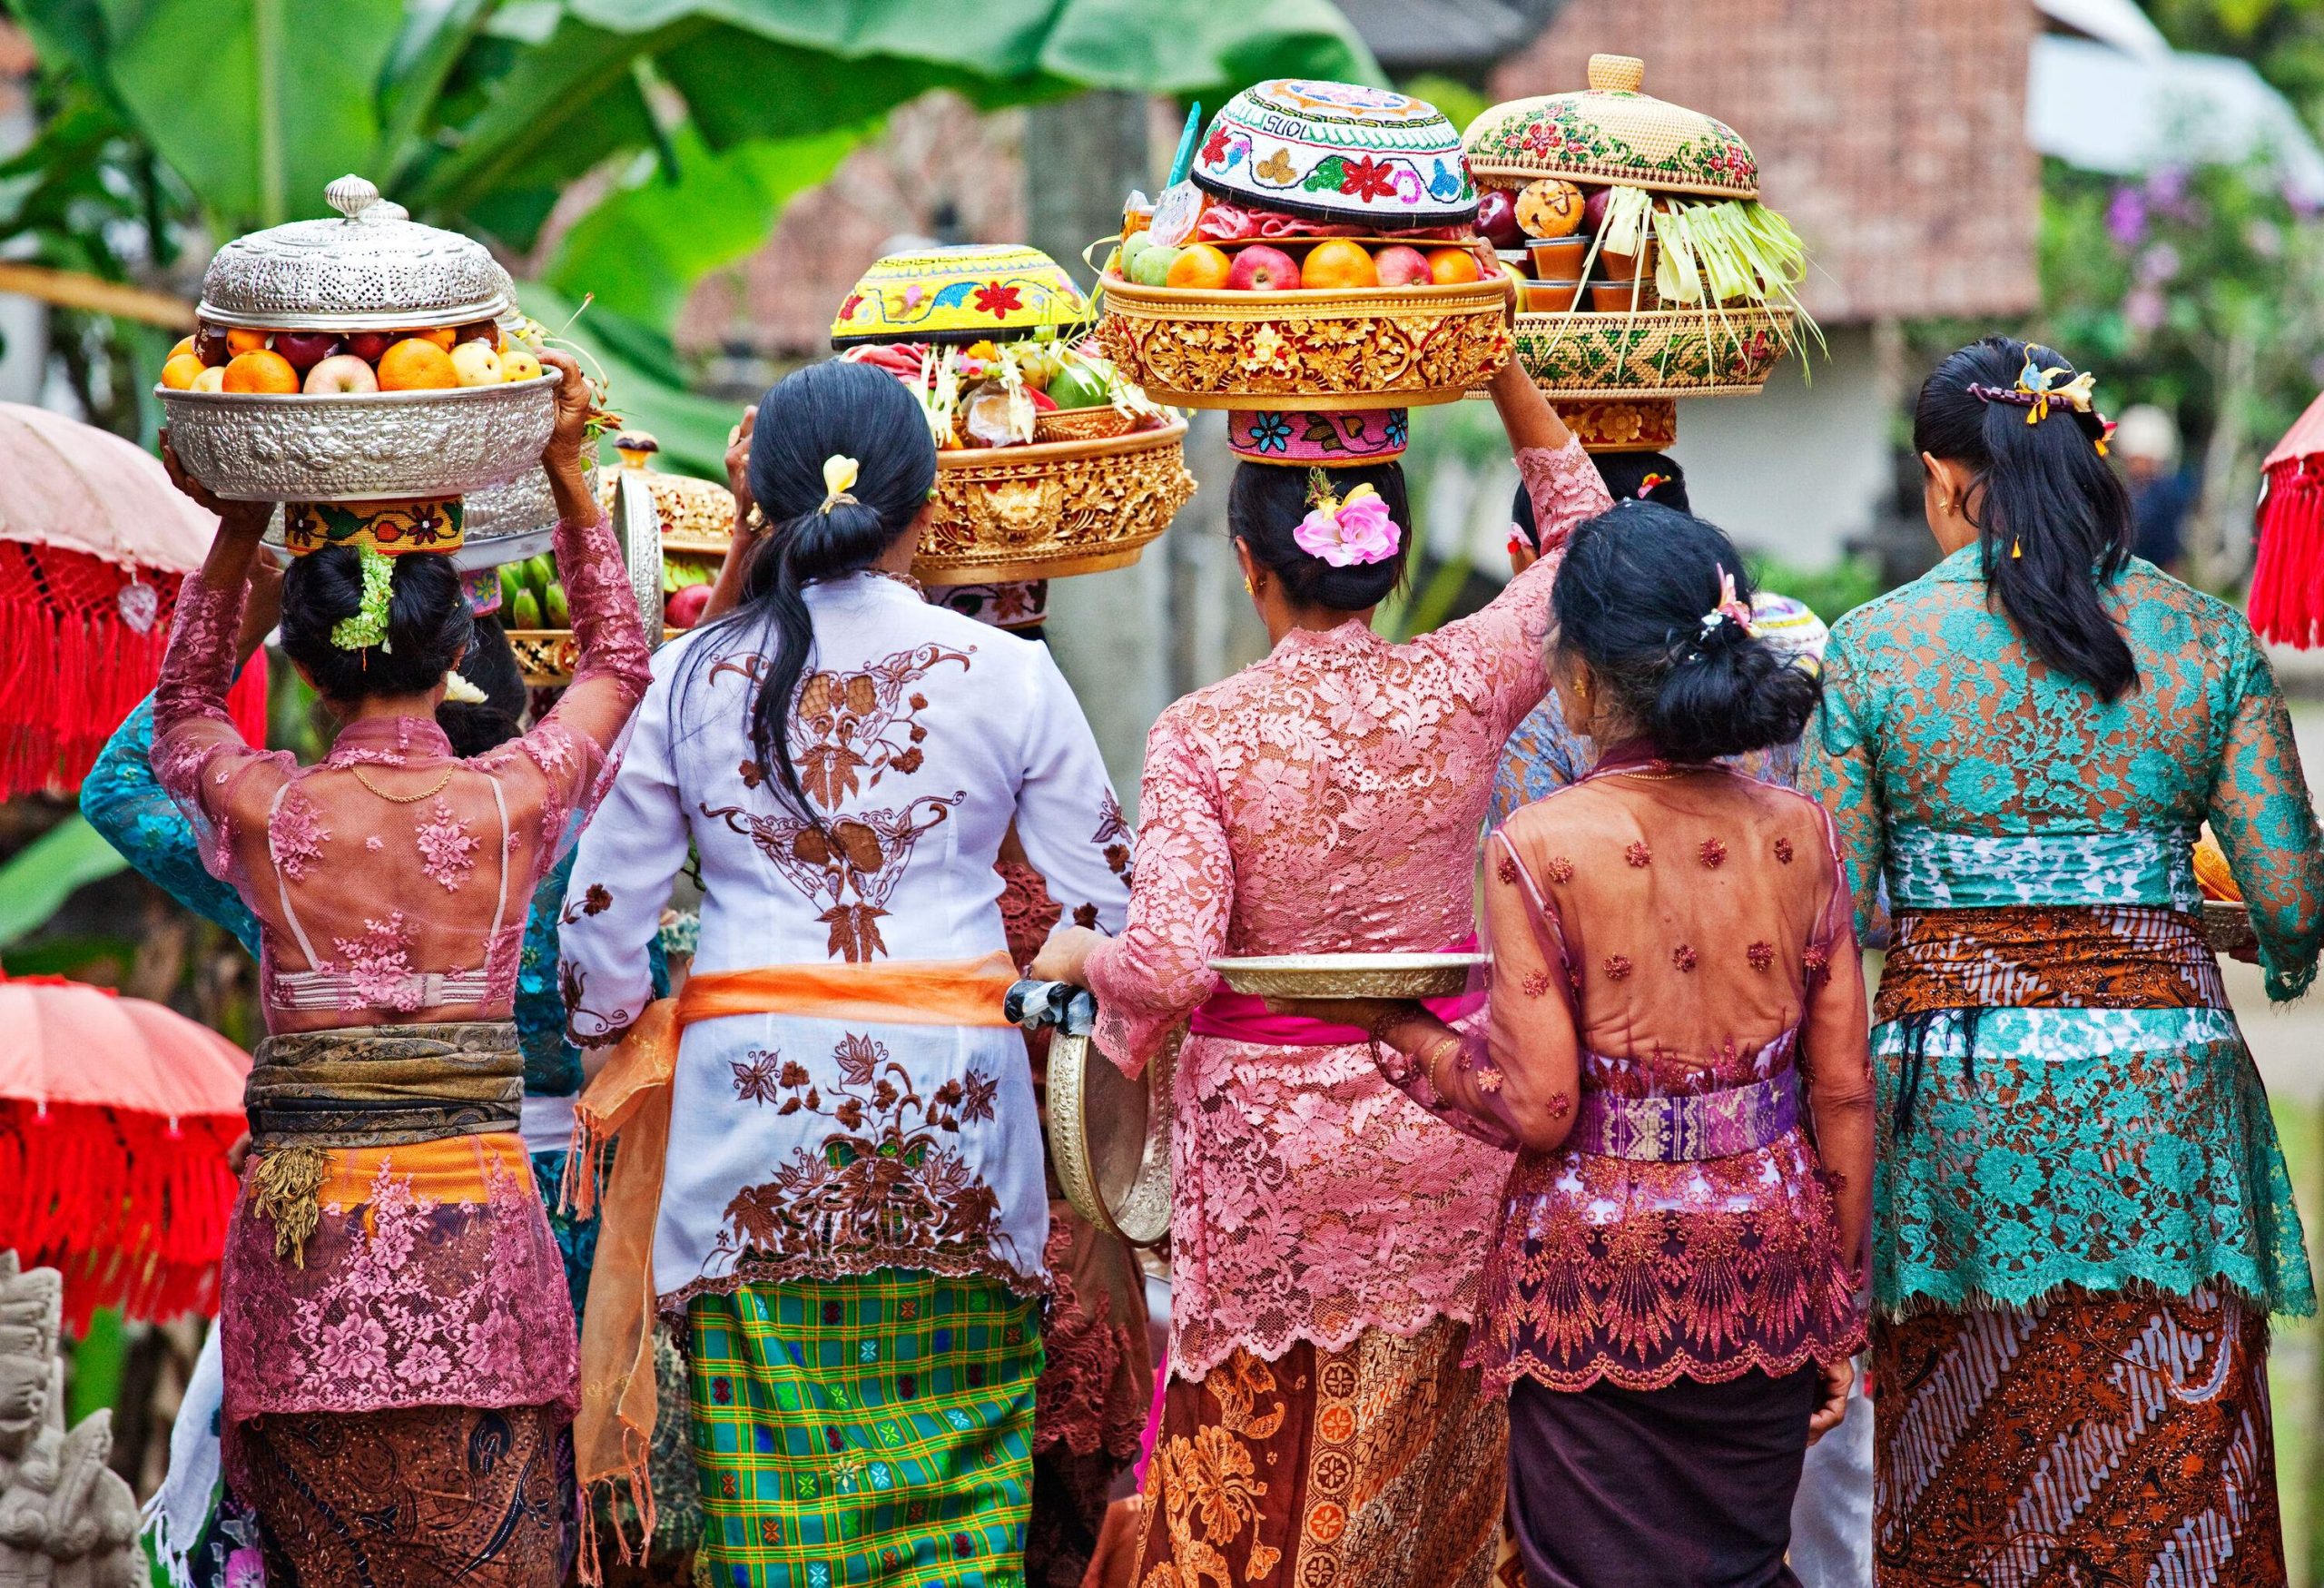 Women in colourful traditional lace clothing walk with others carrying fruit baskets on their heads.